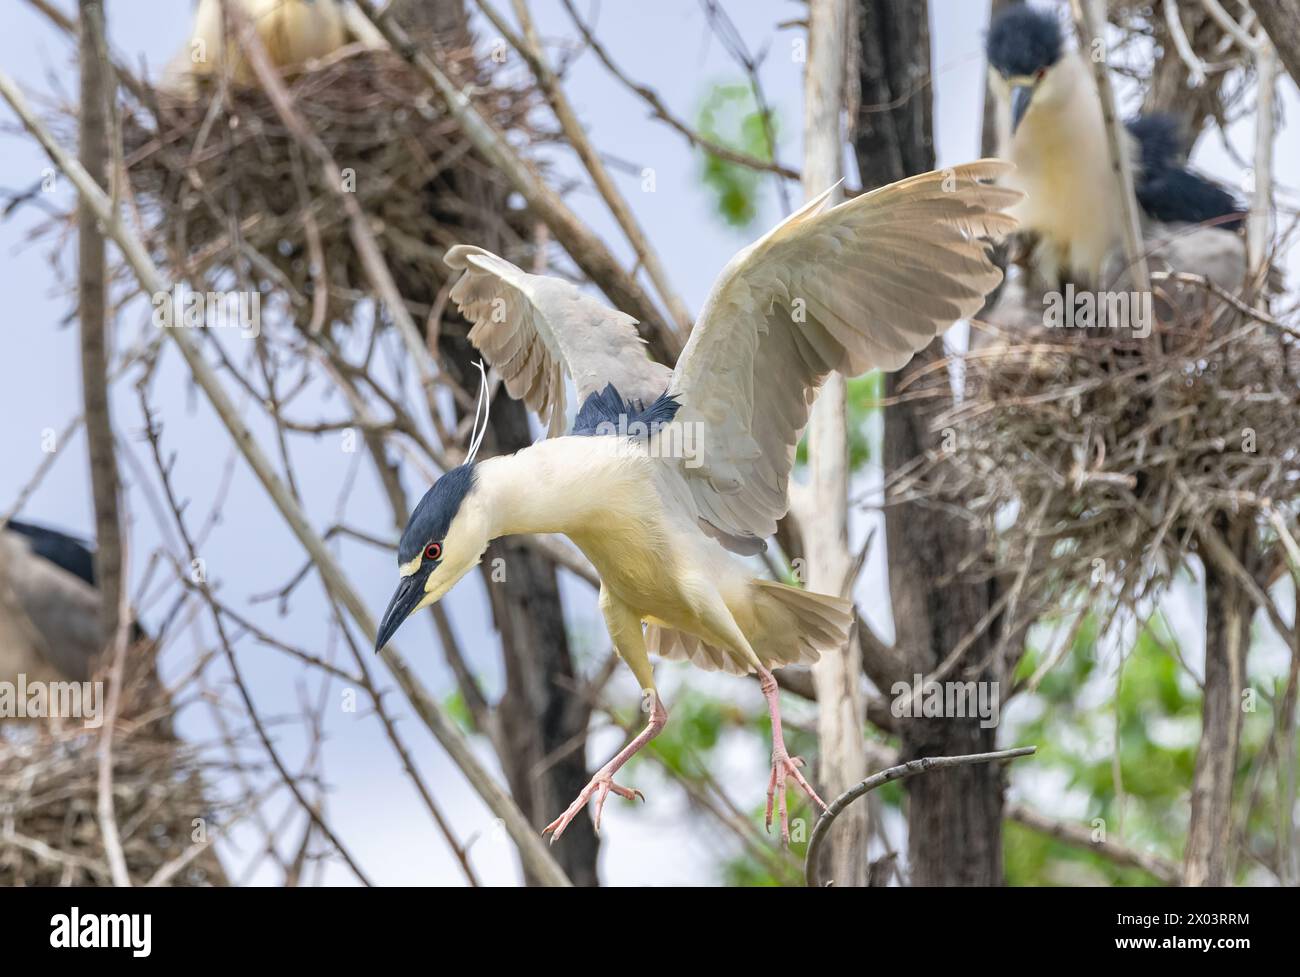 A Black-crowned Night Heron caught in flight action as it looks to land within a nesting colony of other herons. Close up view. Stock Photo